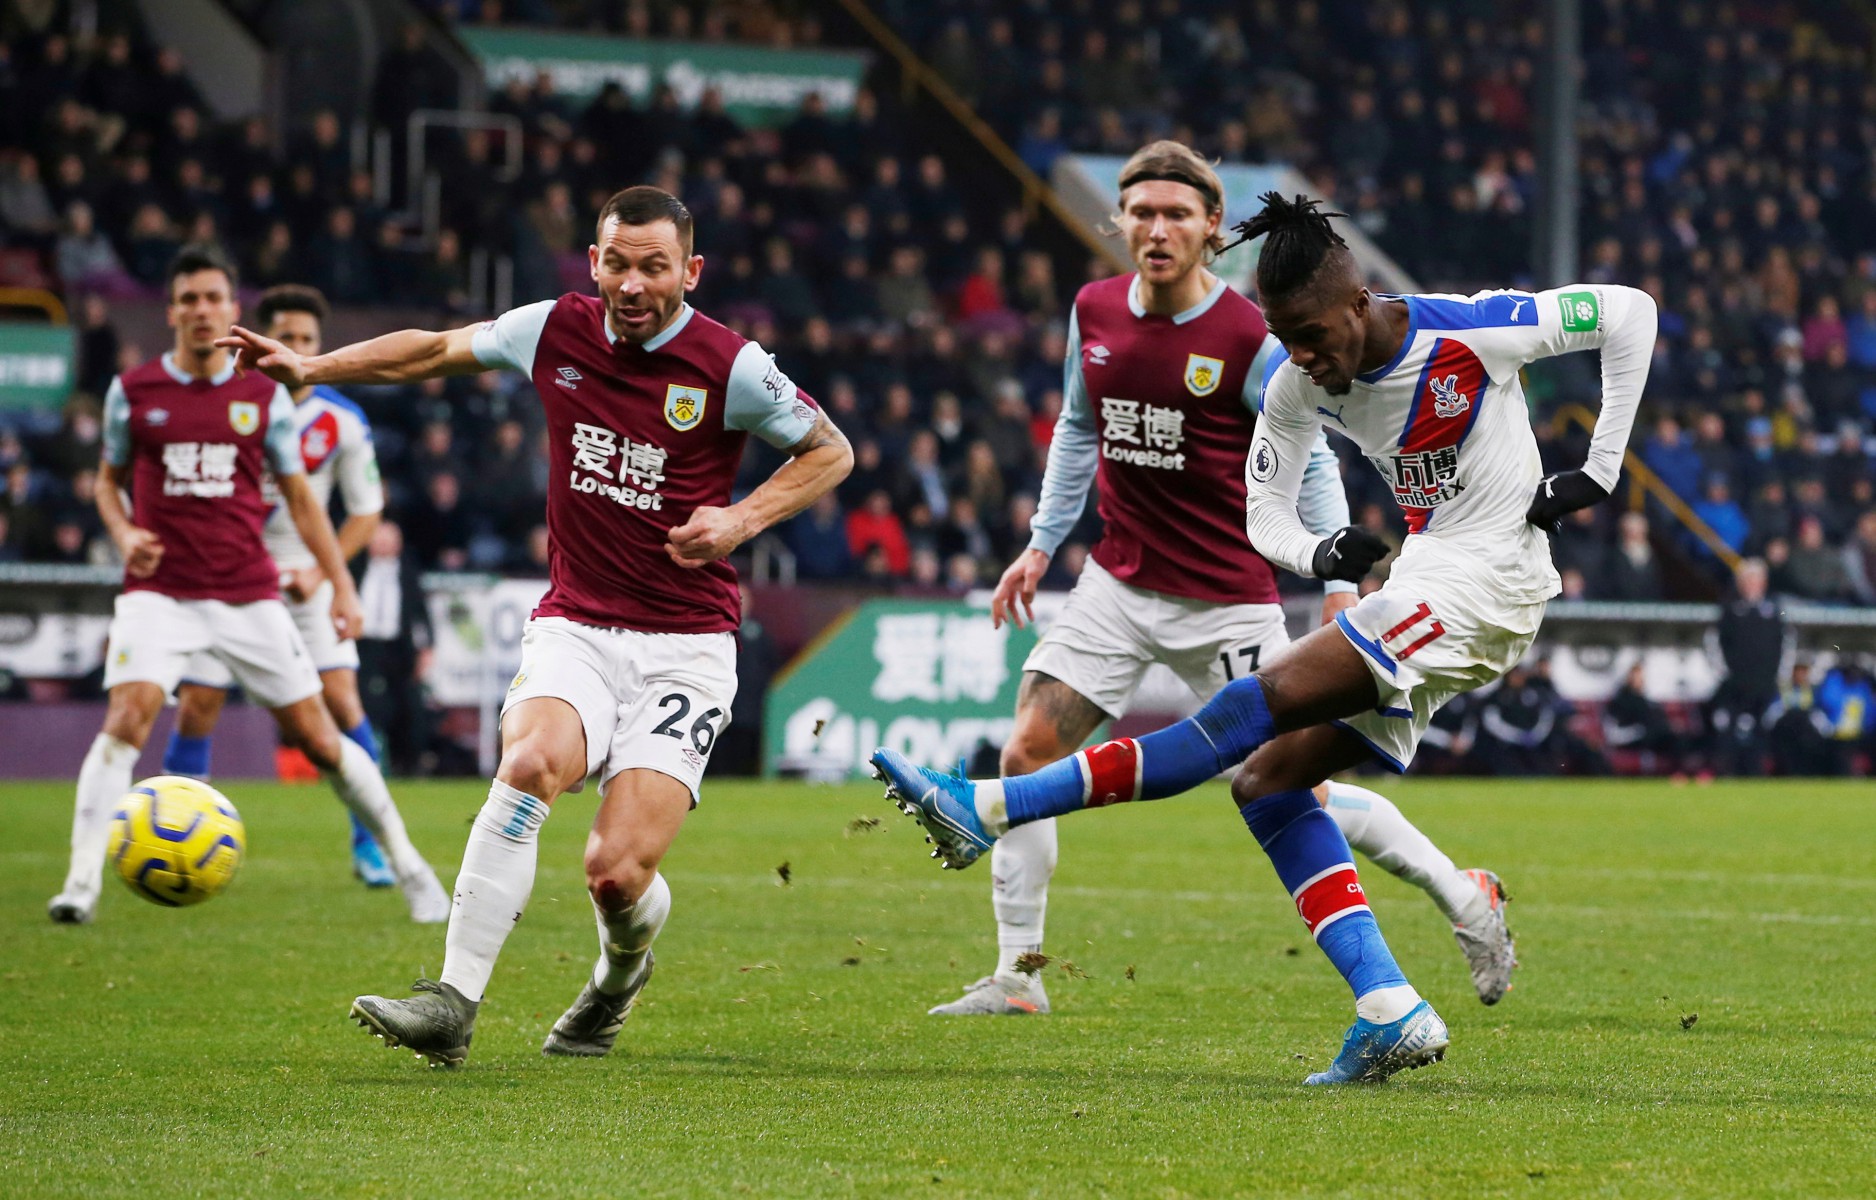 Wilfried Zaha lashes home the breakthrough goal for Crystal Palace but might have been surprised his shot beat Nick Pope